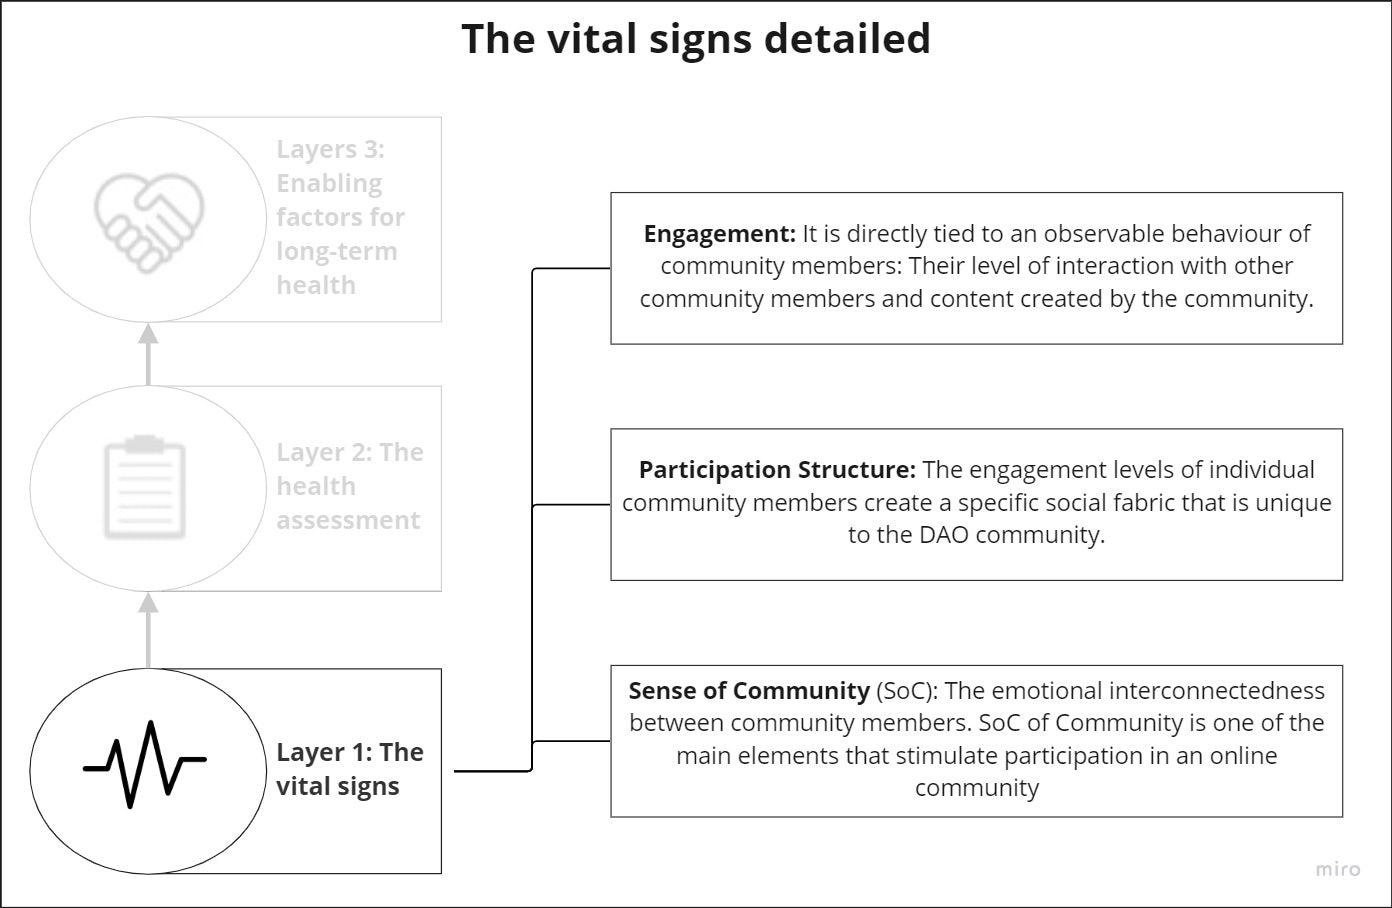 Fig 4: The vital signs detailed